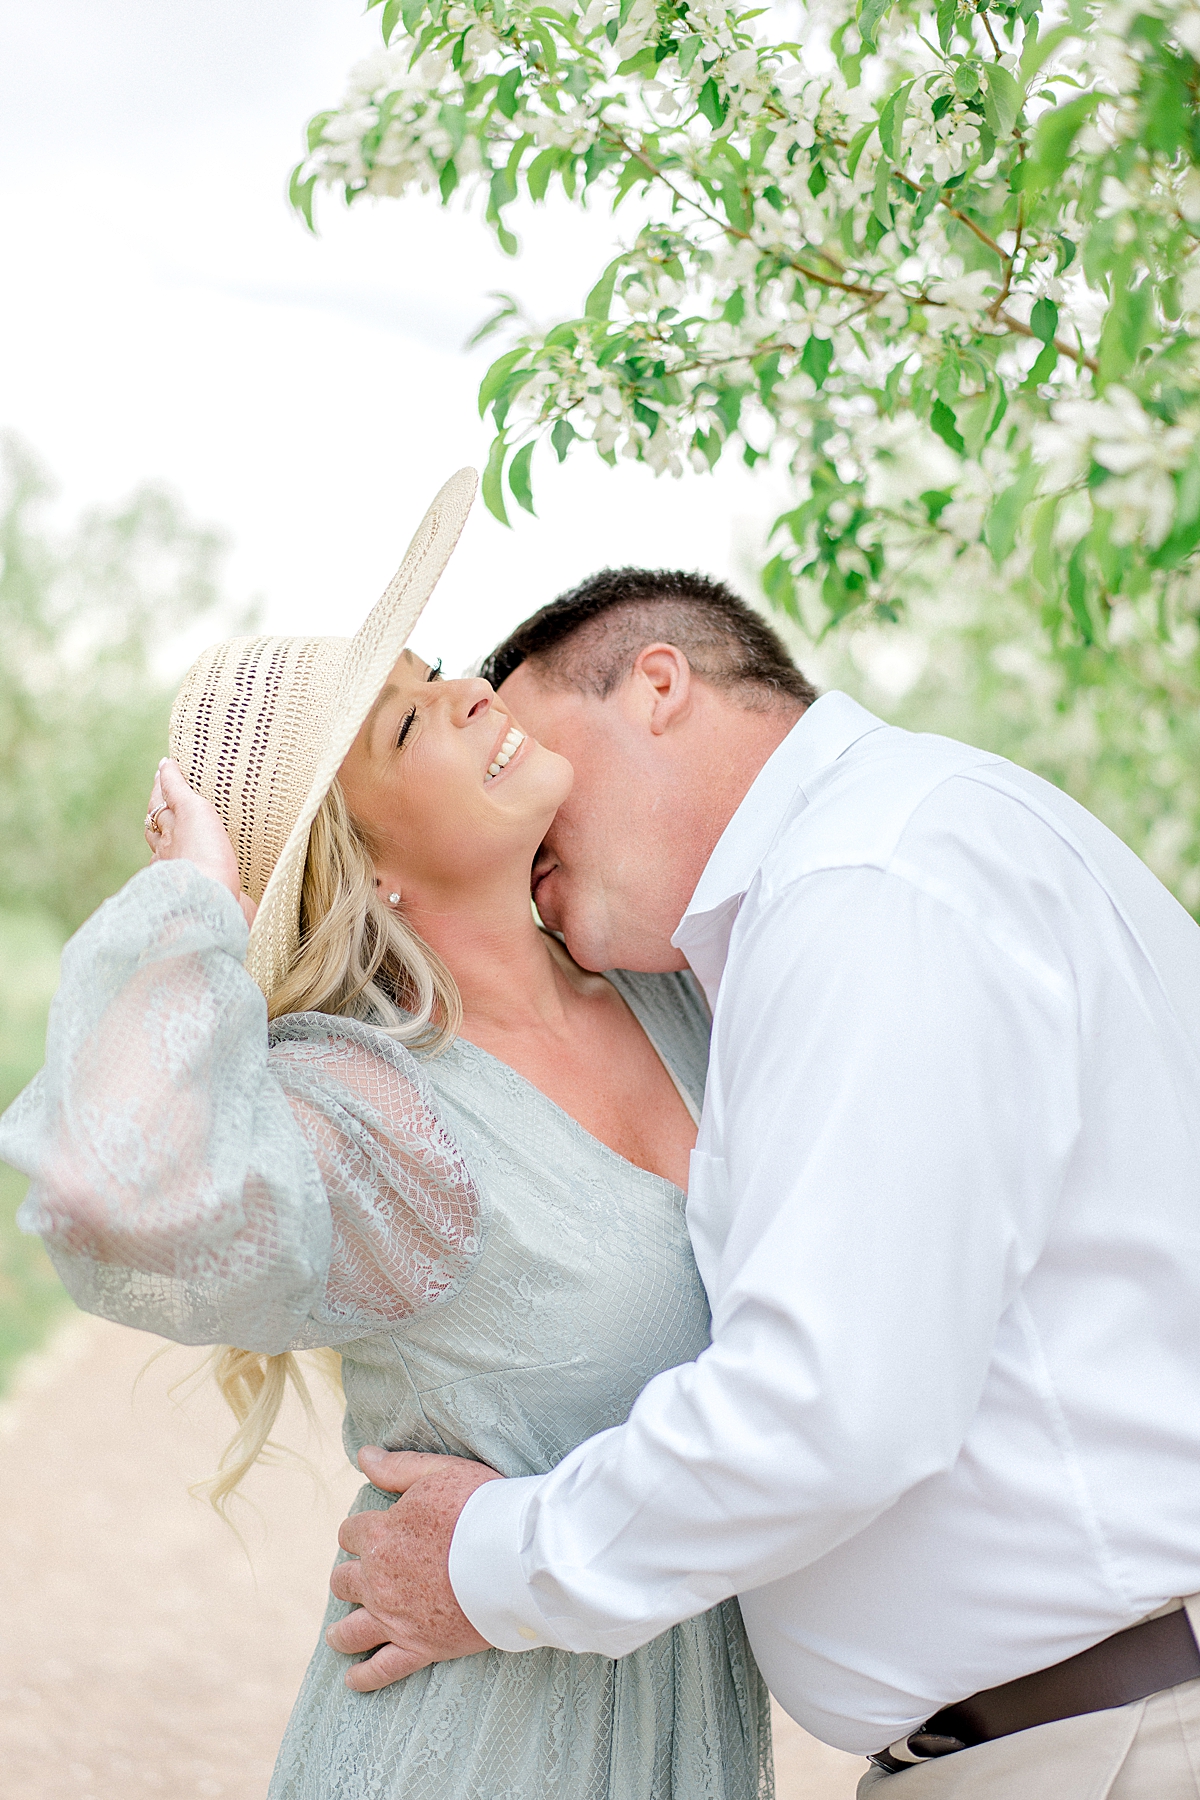 Highlands Ranch engagement photos on film in the spring blossoms